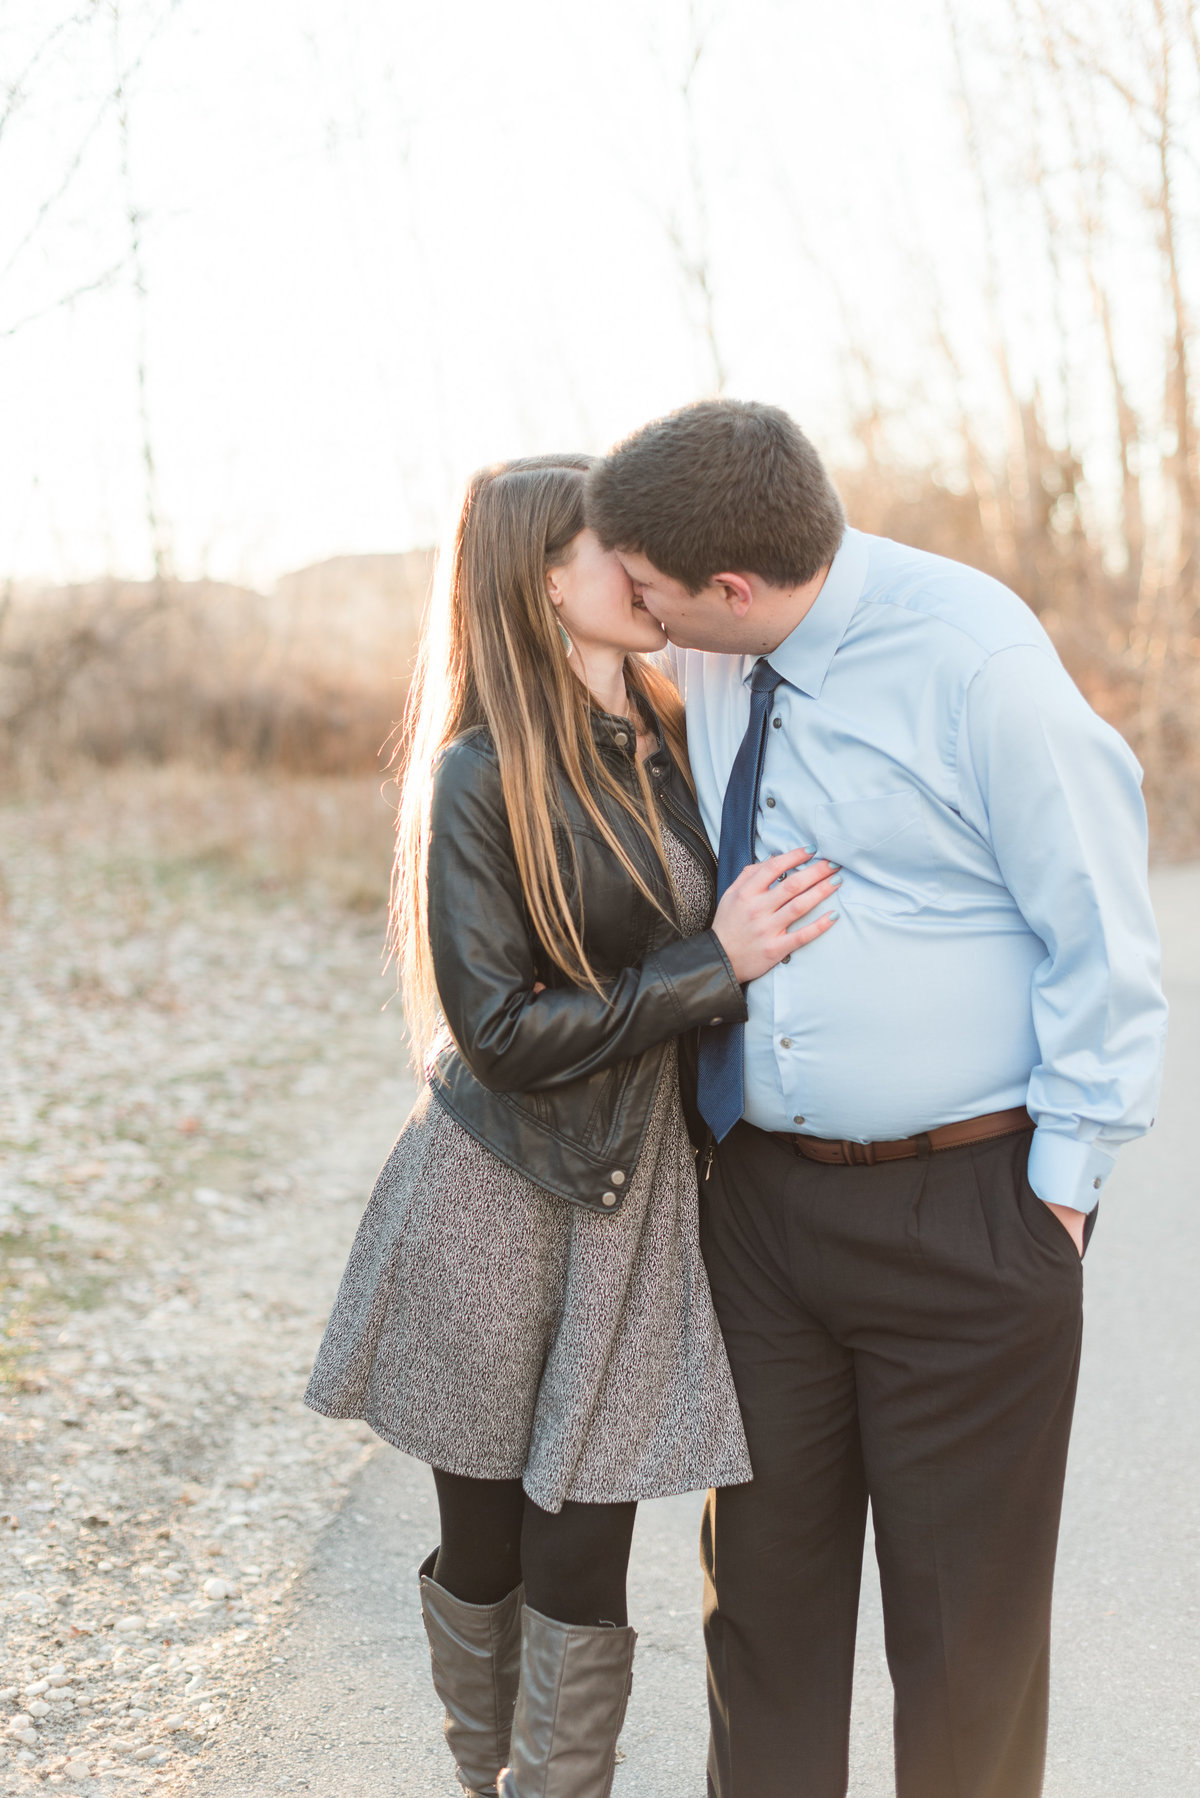 20190302 - Jannae and Forest Engagement Session 267 - A Winter Reid Merrill Park Engagement Session